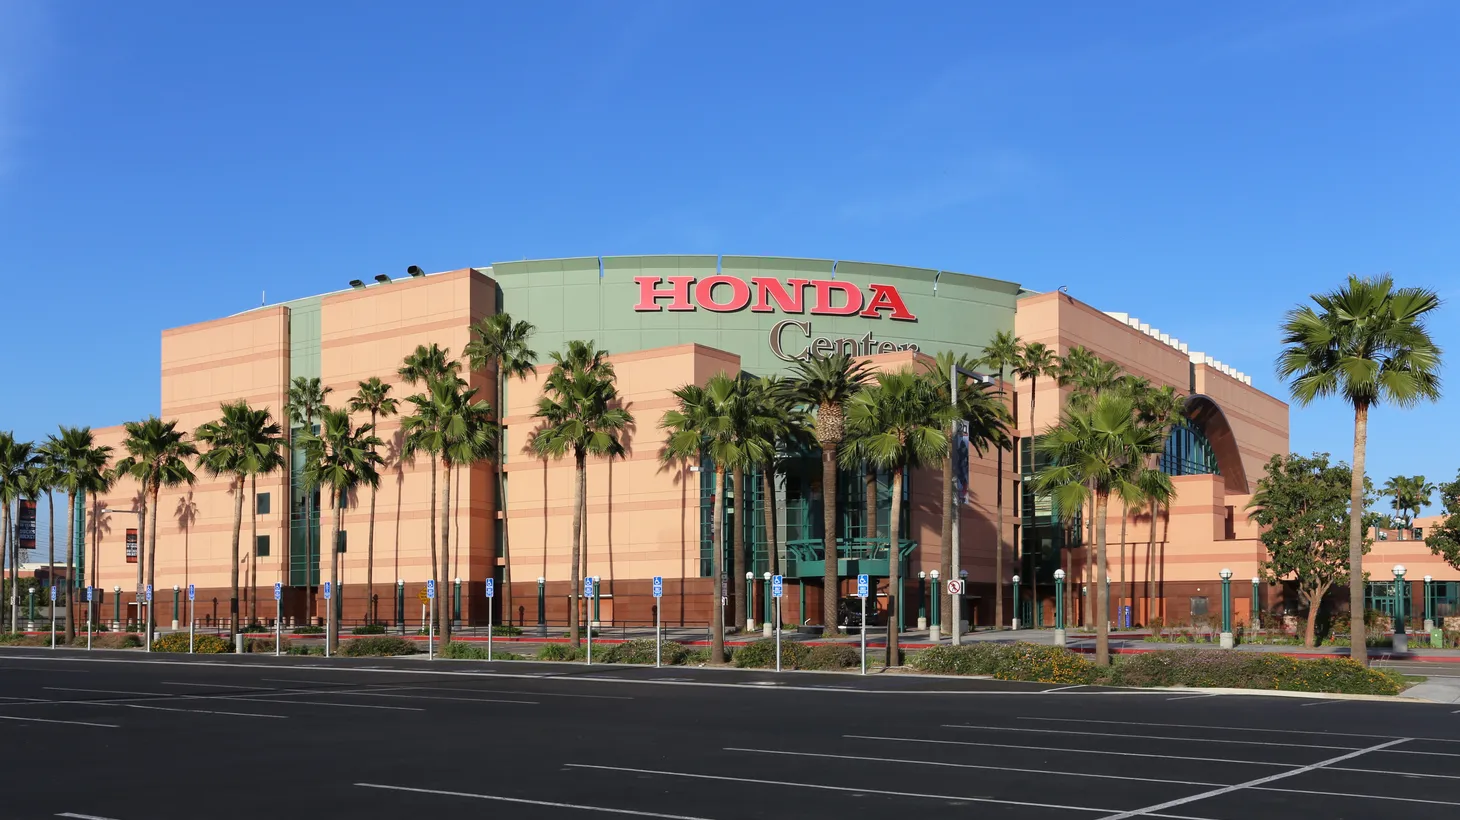 Gustavo Arellano says that the Honda Center is “not a beloved place the way Dodgers Stadium is … but it also signifies that … Orange County is not just a backwater [suburb]. It could support a huge arena.”